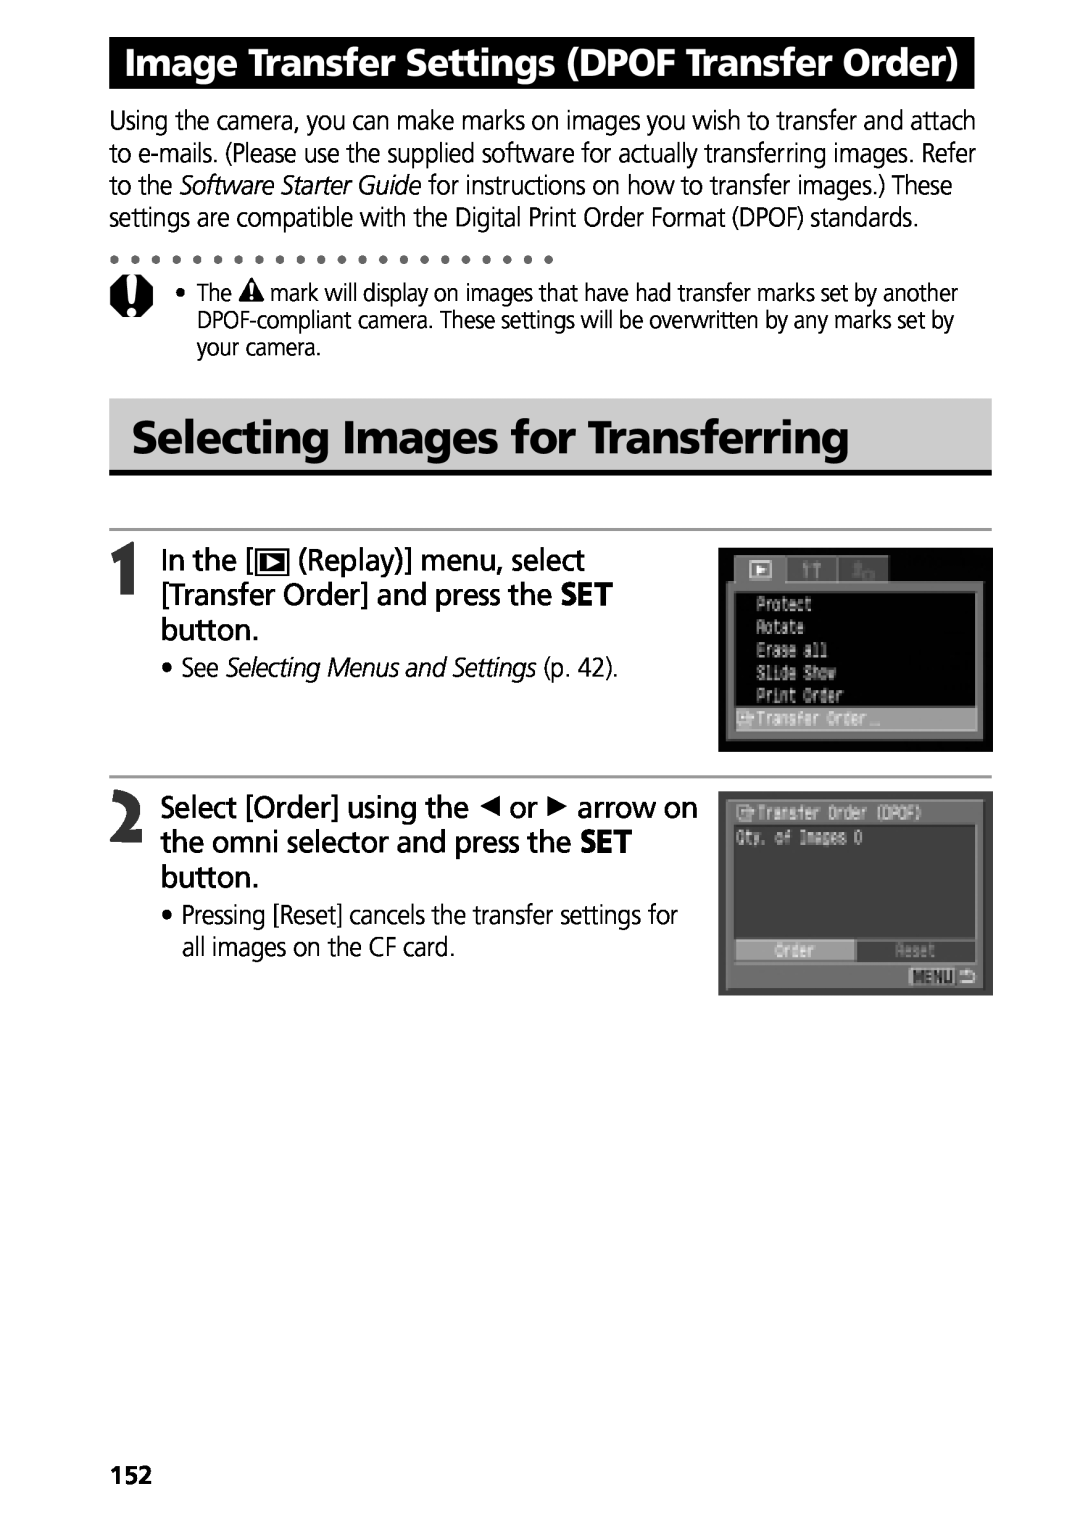 Canon G3 manual Selecting Images for Transferring, Image Transfer Settings DPOF Transfer Order 